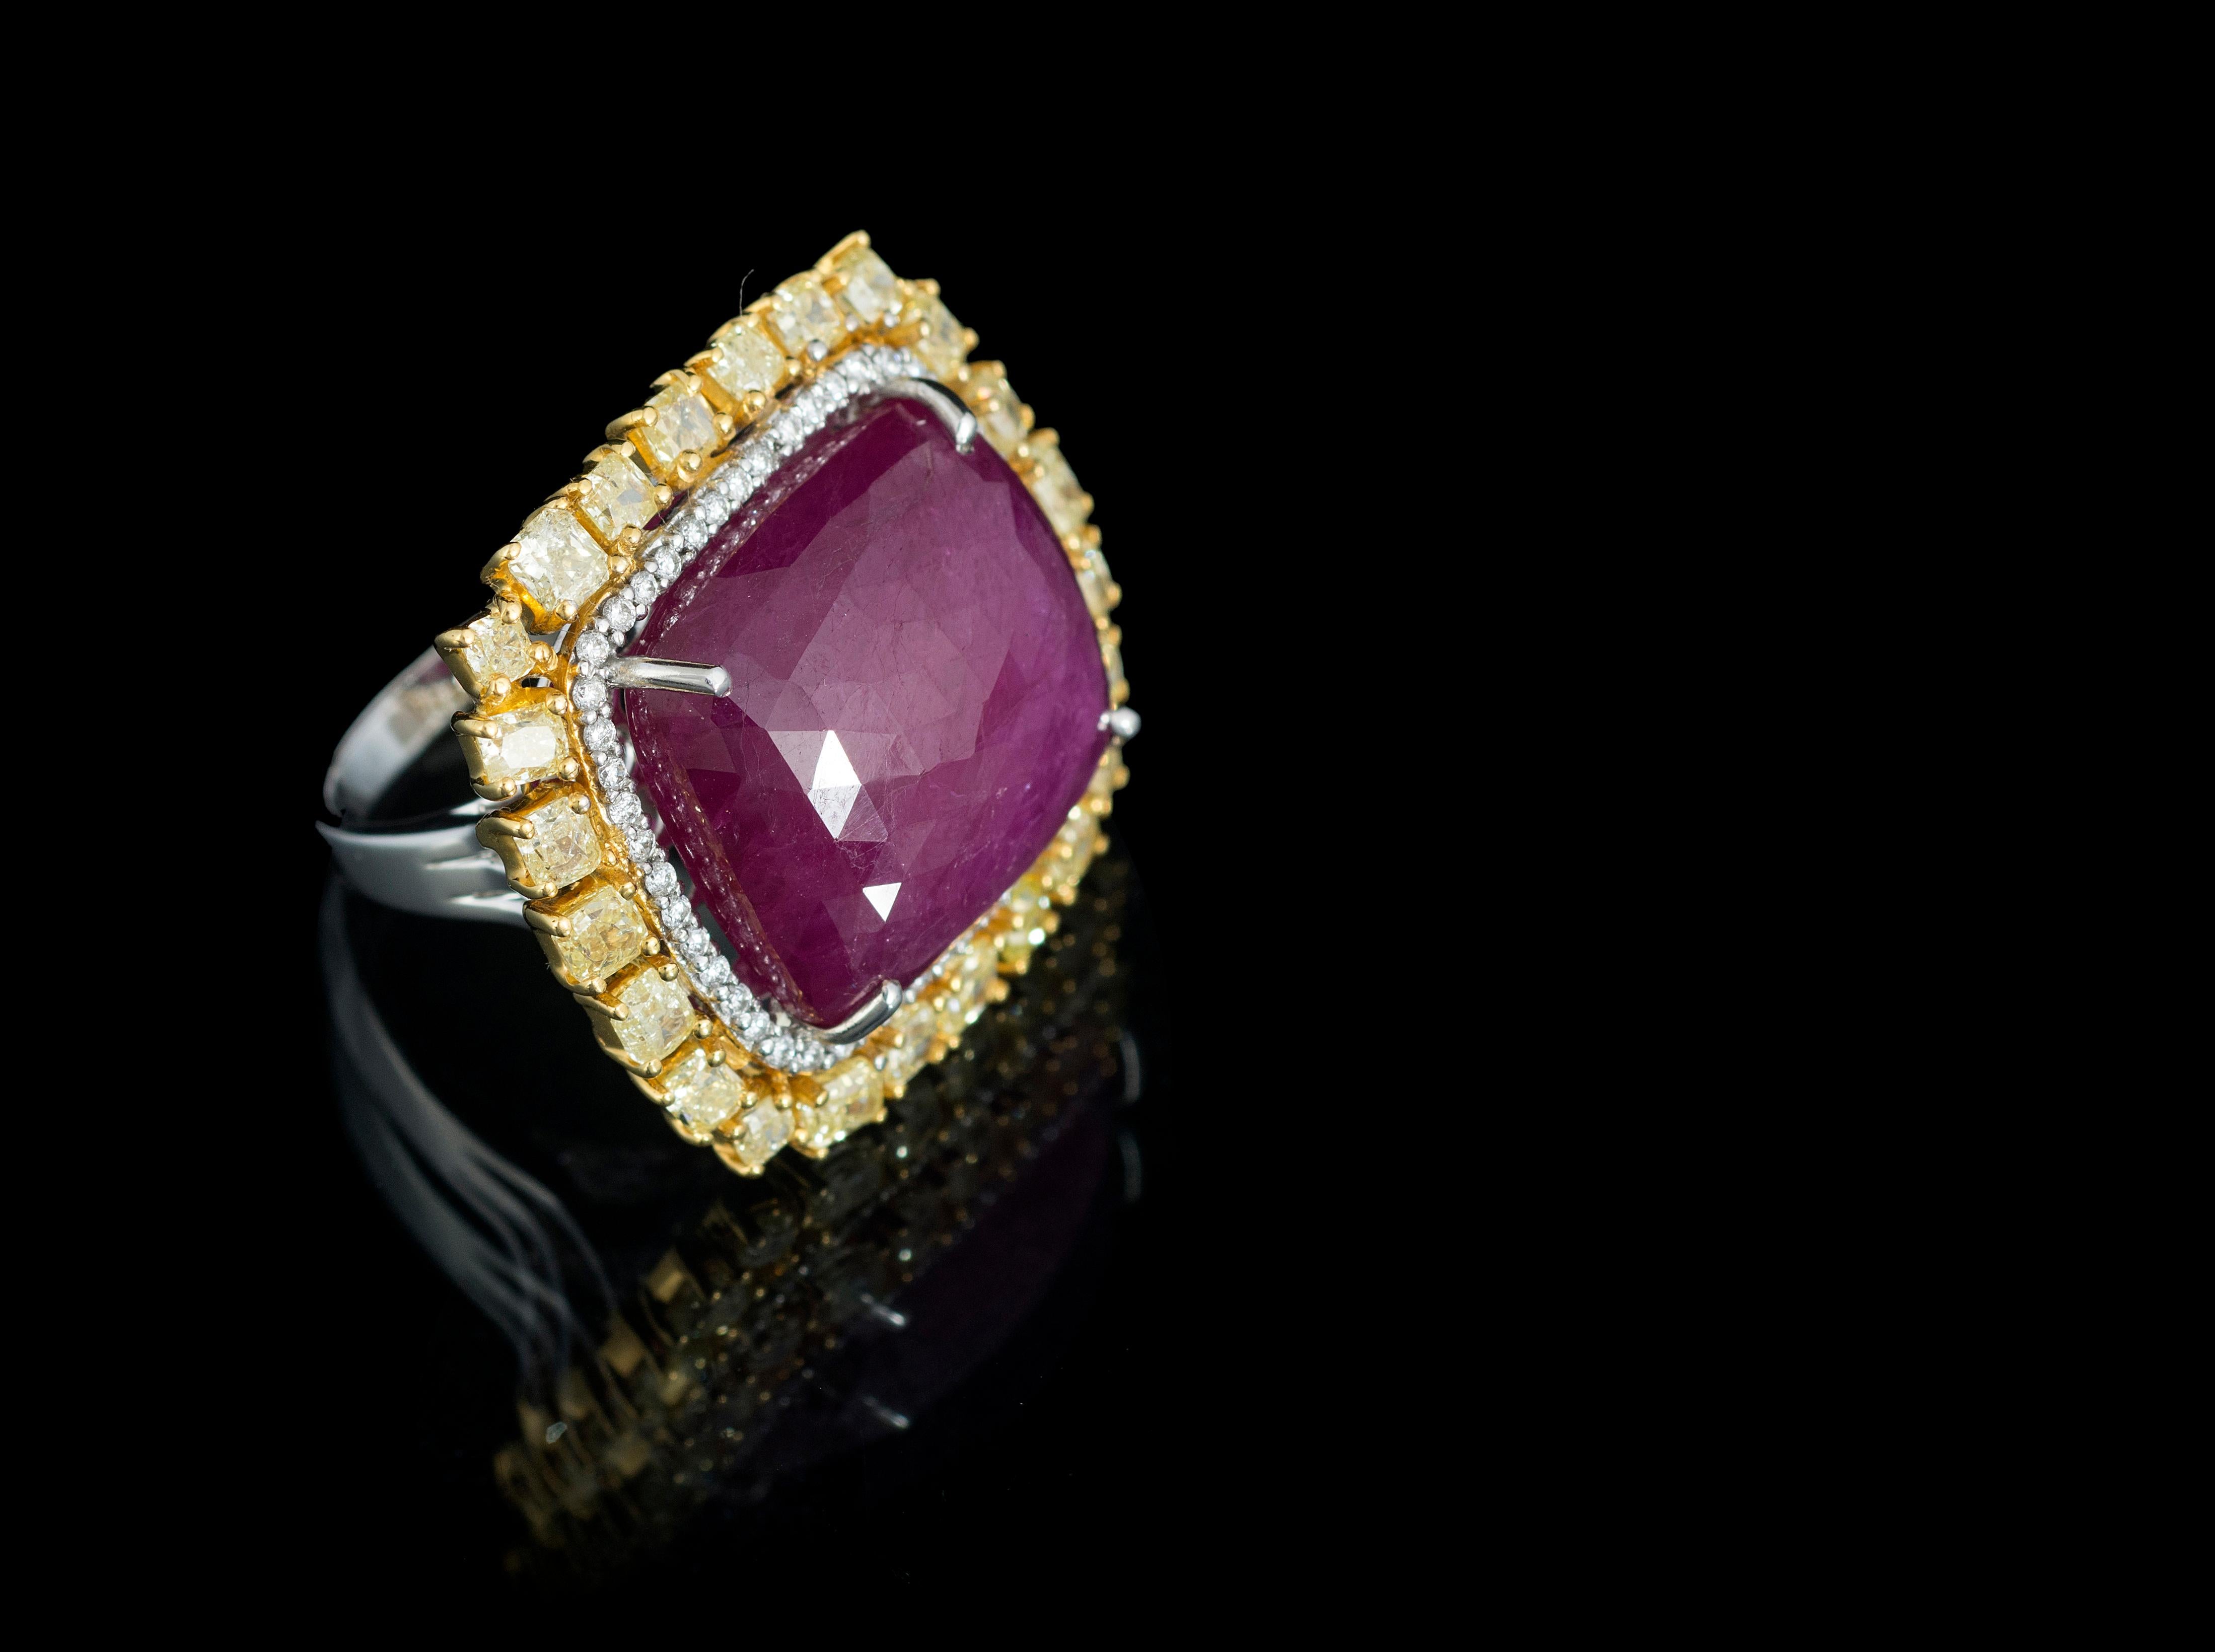 A very gorgeous and attractive cocktail ring set in 18K white gold with Ruby and Yellow Diamonds. The Ruby is of Mozambique origin and weighs 34.82 carats. It is free of heat and any other treatment. The weight of the yellow princess diamonds is